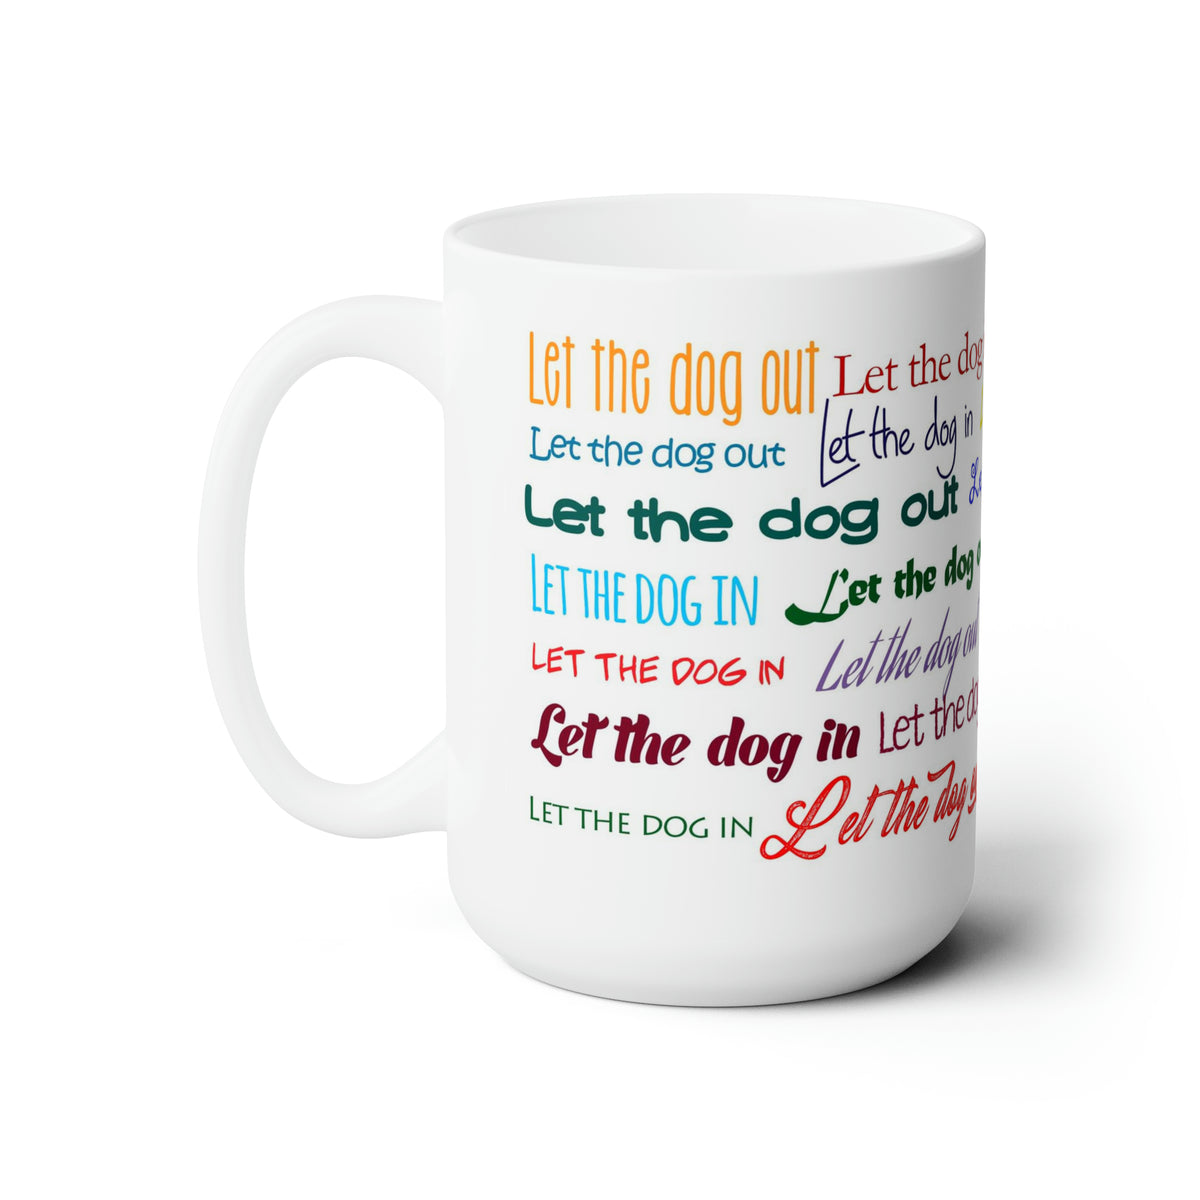 Let the Dog Out, Let the Dog In.  Dog Lovers Understand This.  Humorous Mug for Dog Lovers